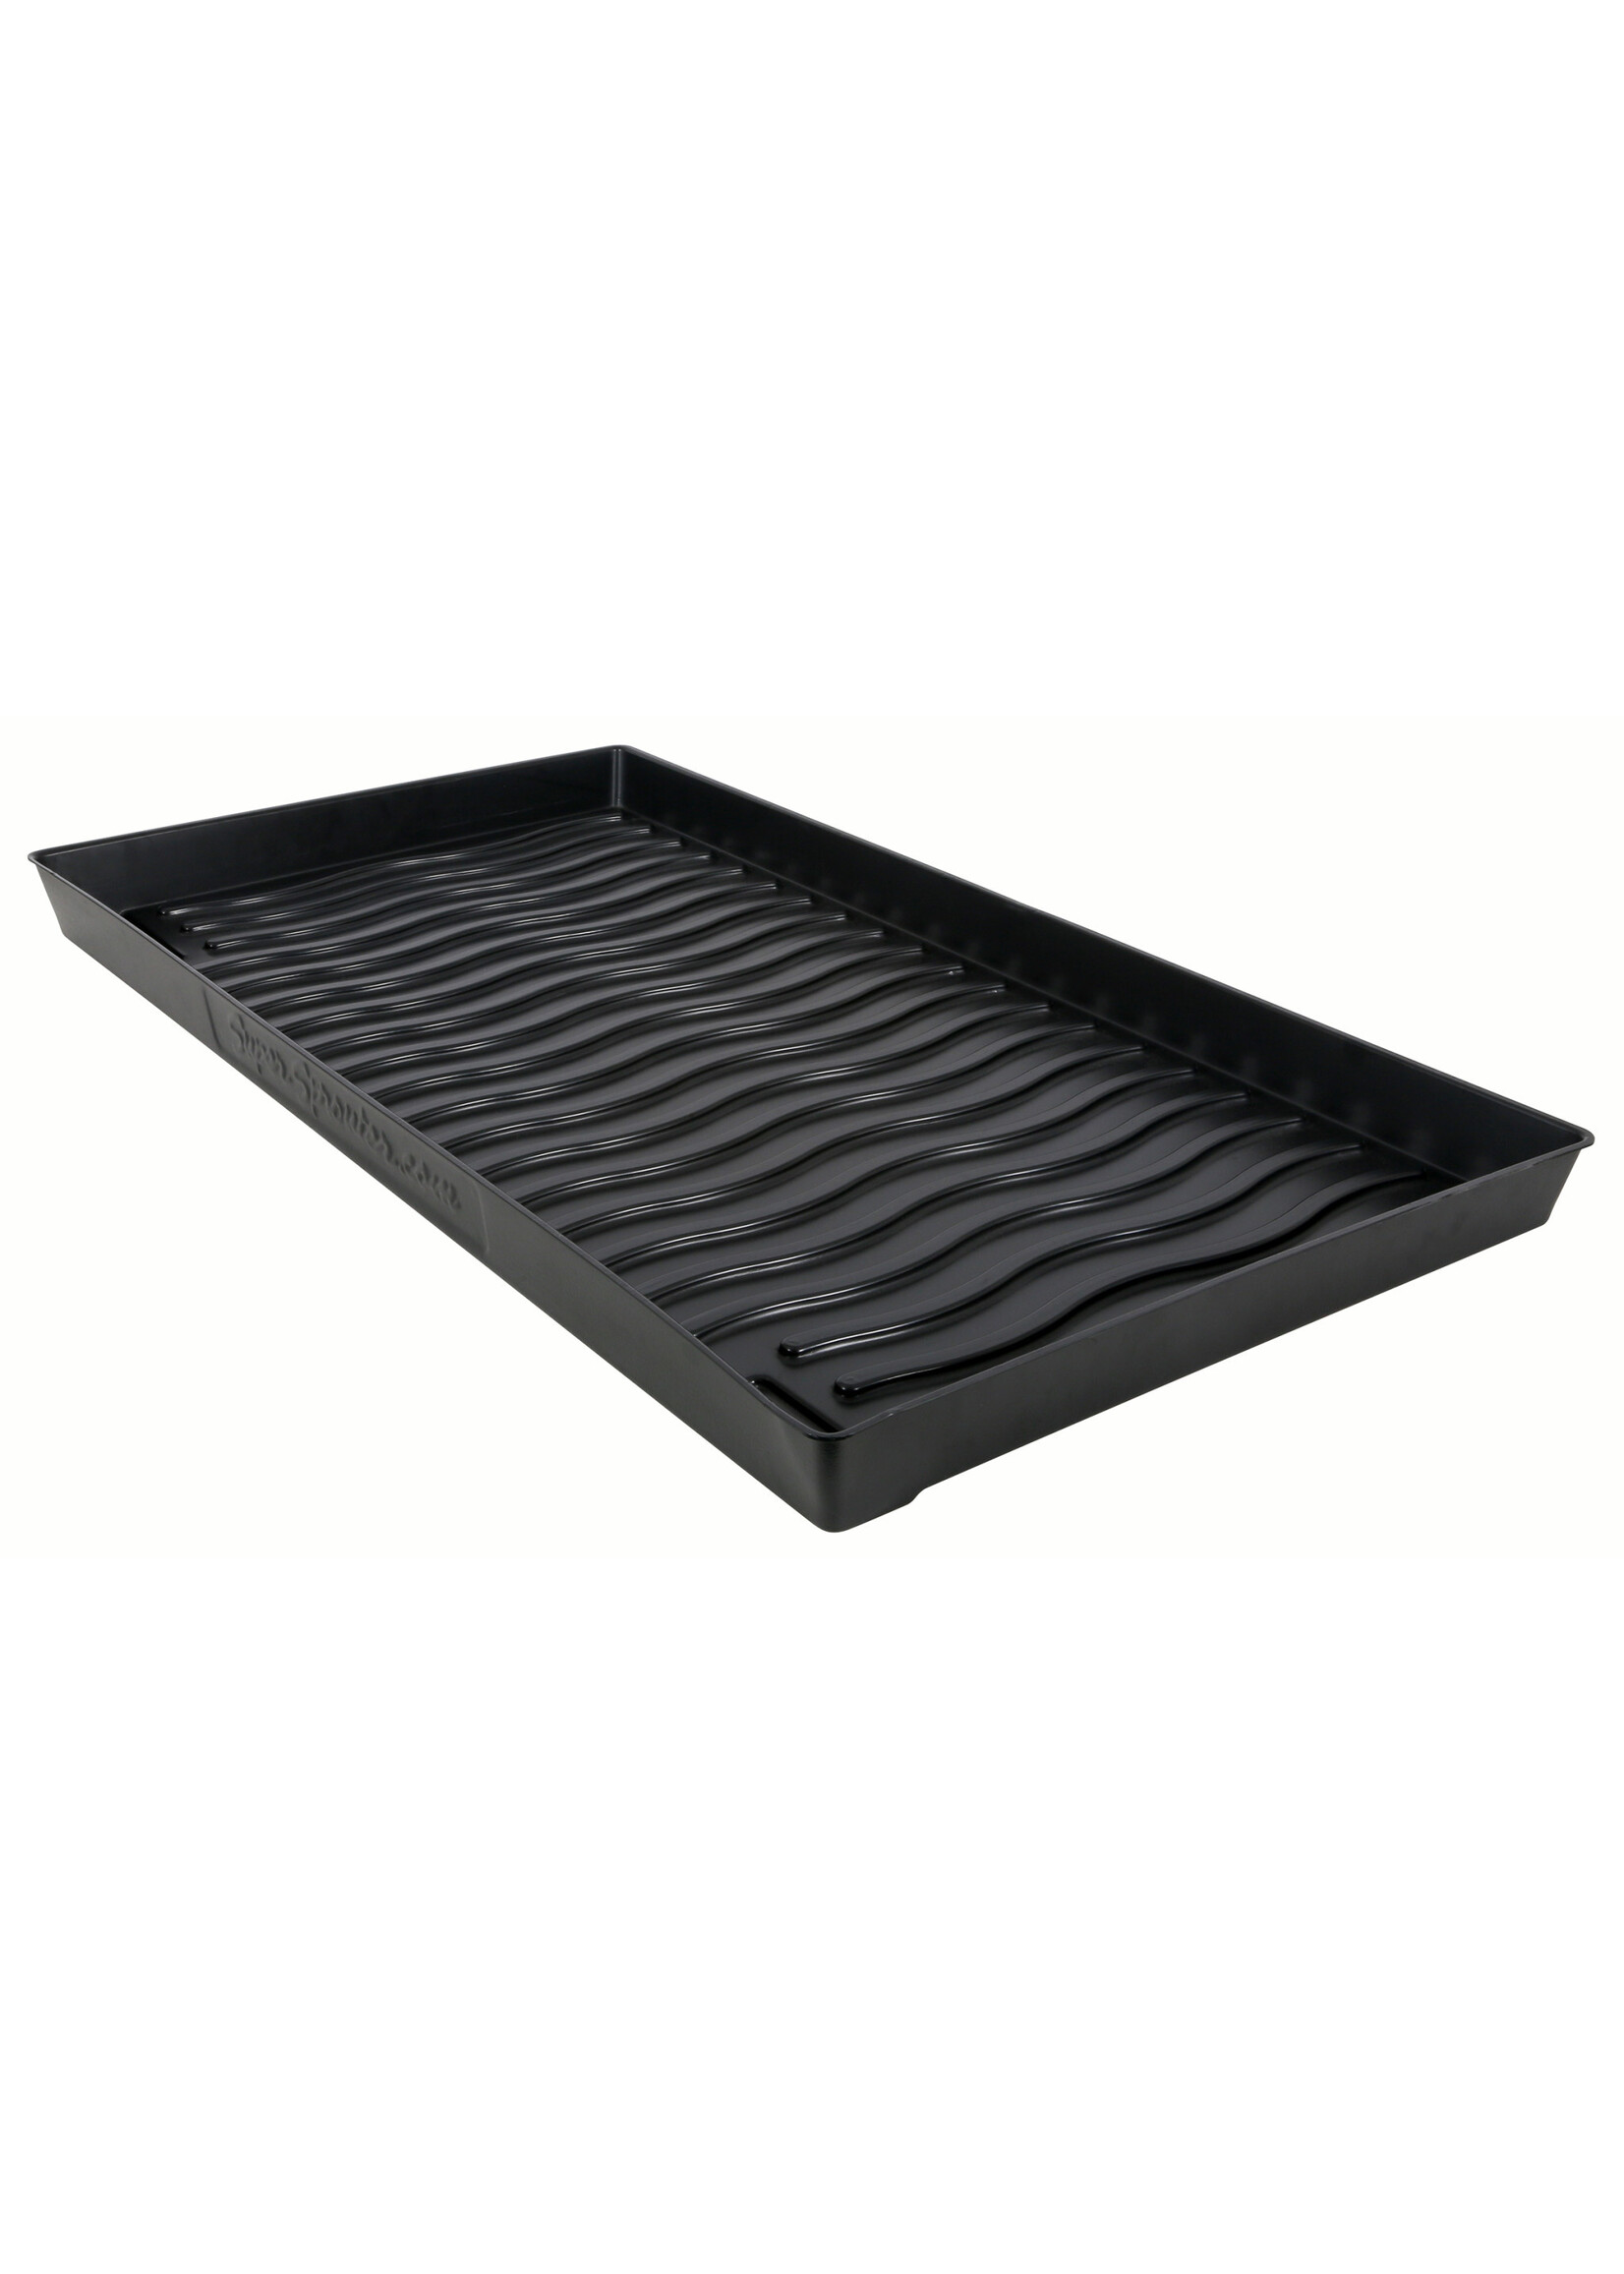 Super Sprouter Super Sprouter 2 ft x 4 ft Propagation Tray